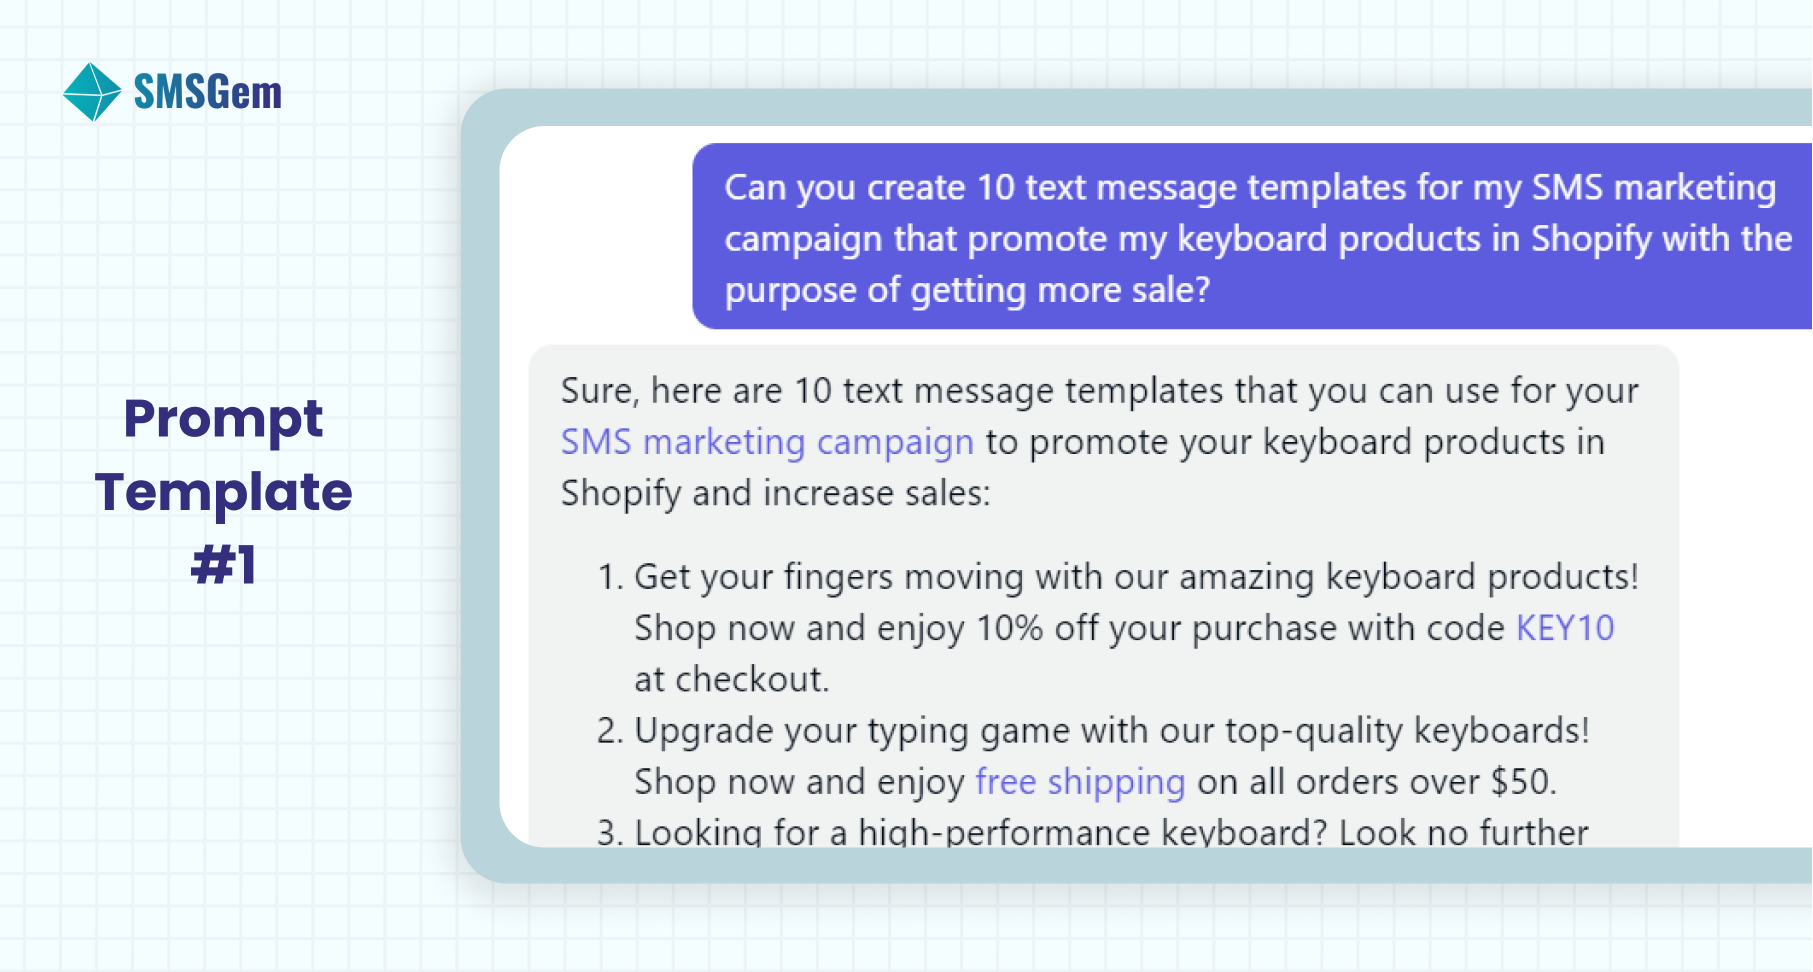 CHatGPT Prompt for SMS Marketing